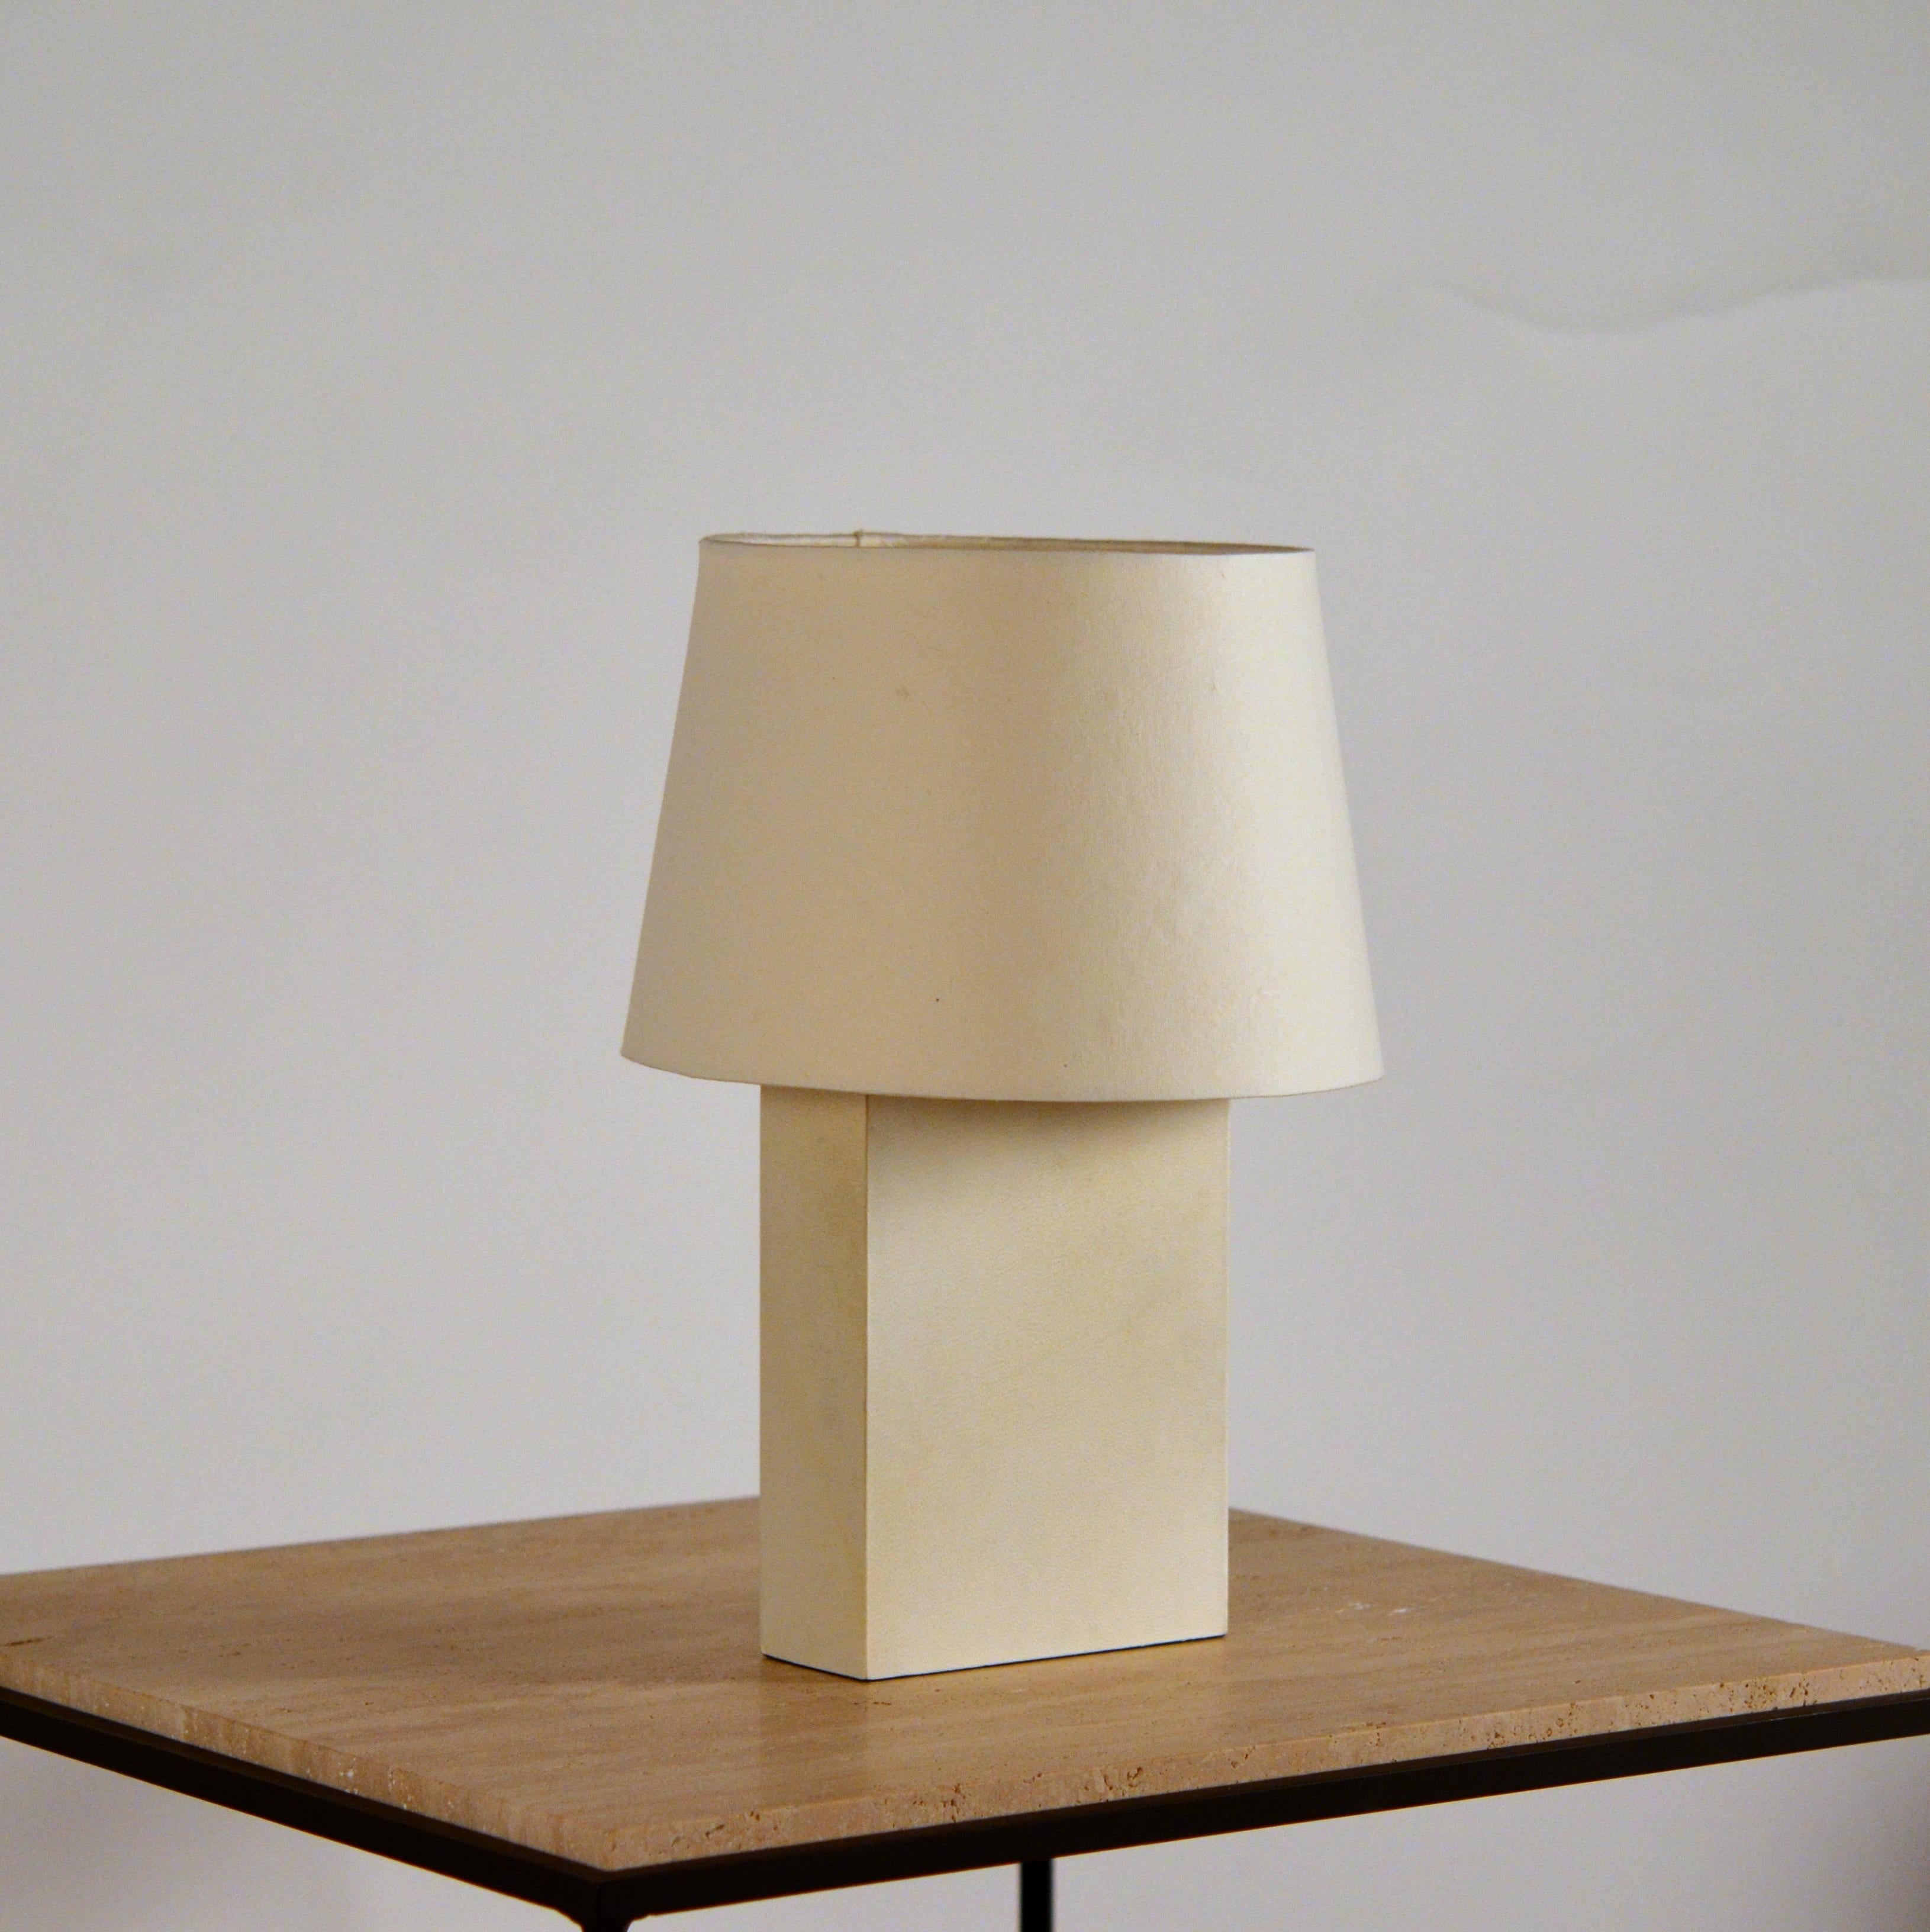 Chic 'Bloc' parchment table lamp by Design Frères.

Attractive European style shade mount with no apparent harp / final.

The dimensions are the overall dimensions of the lamp and the shade together. The shade is 10 in. diameter at base x 8 in.